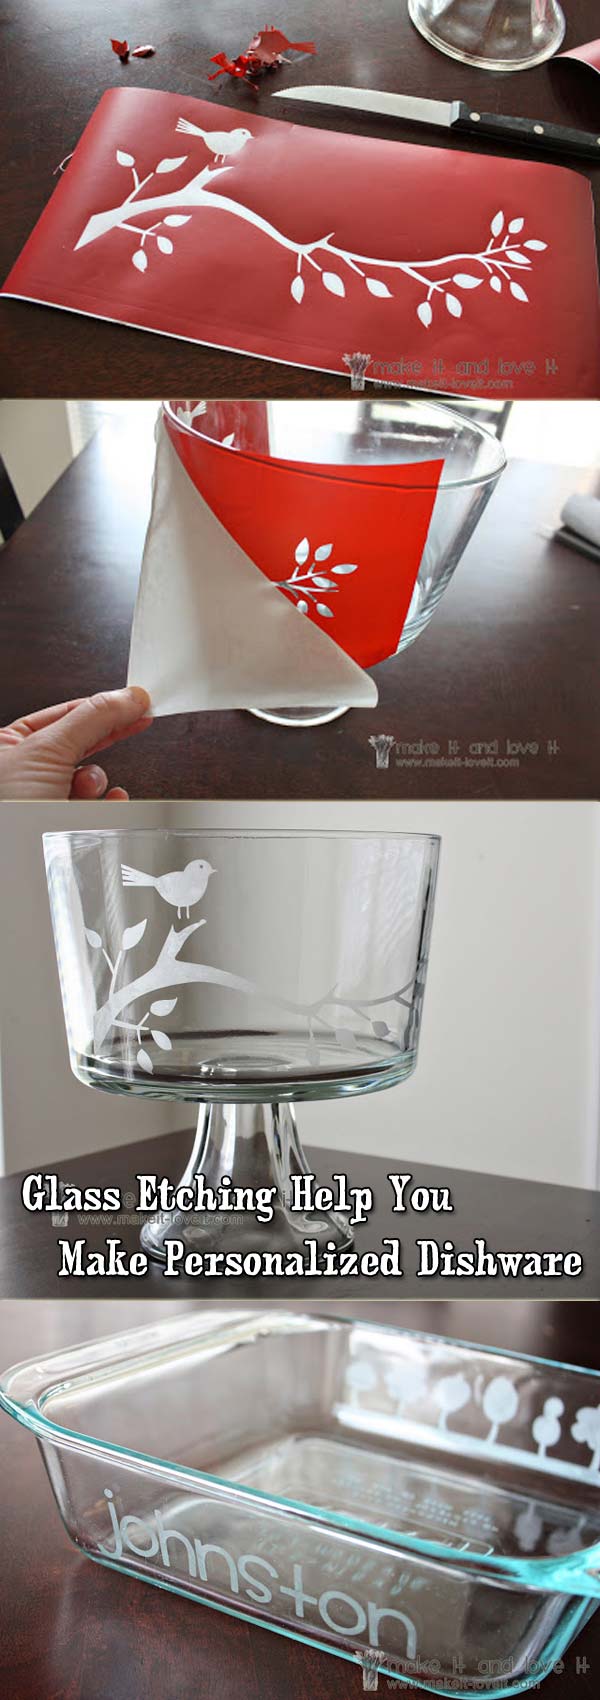 Awesome last minute diy holiday gifts 29.jpg